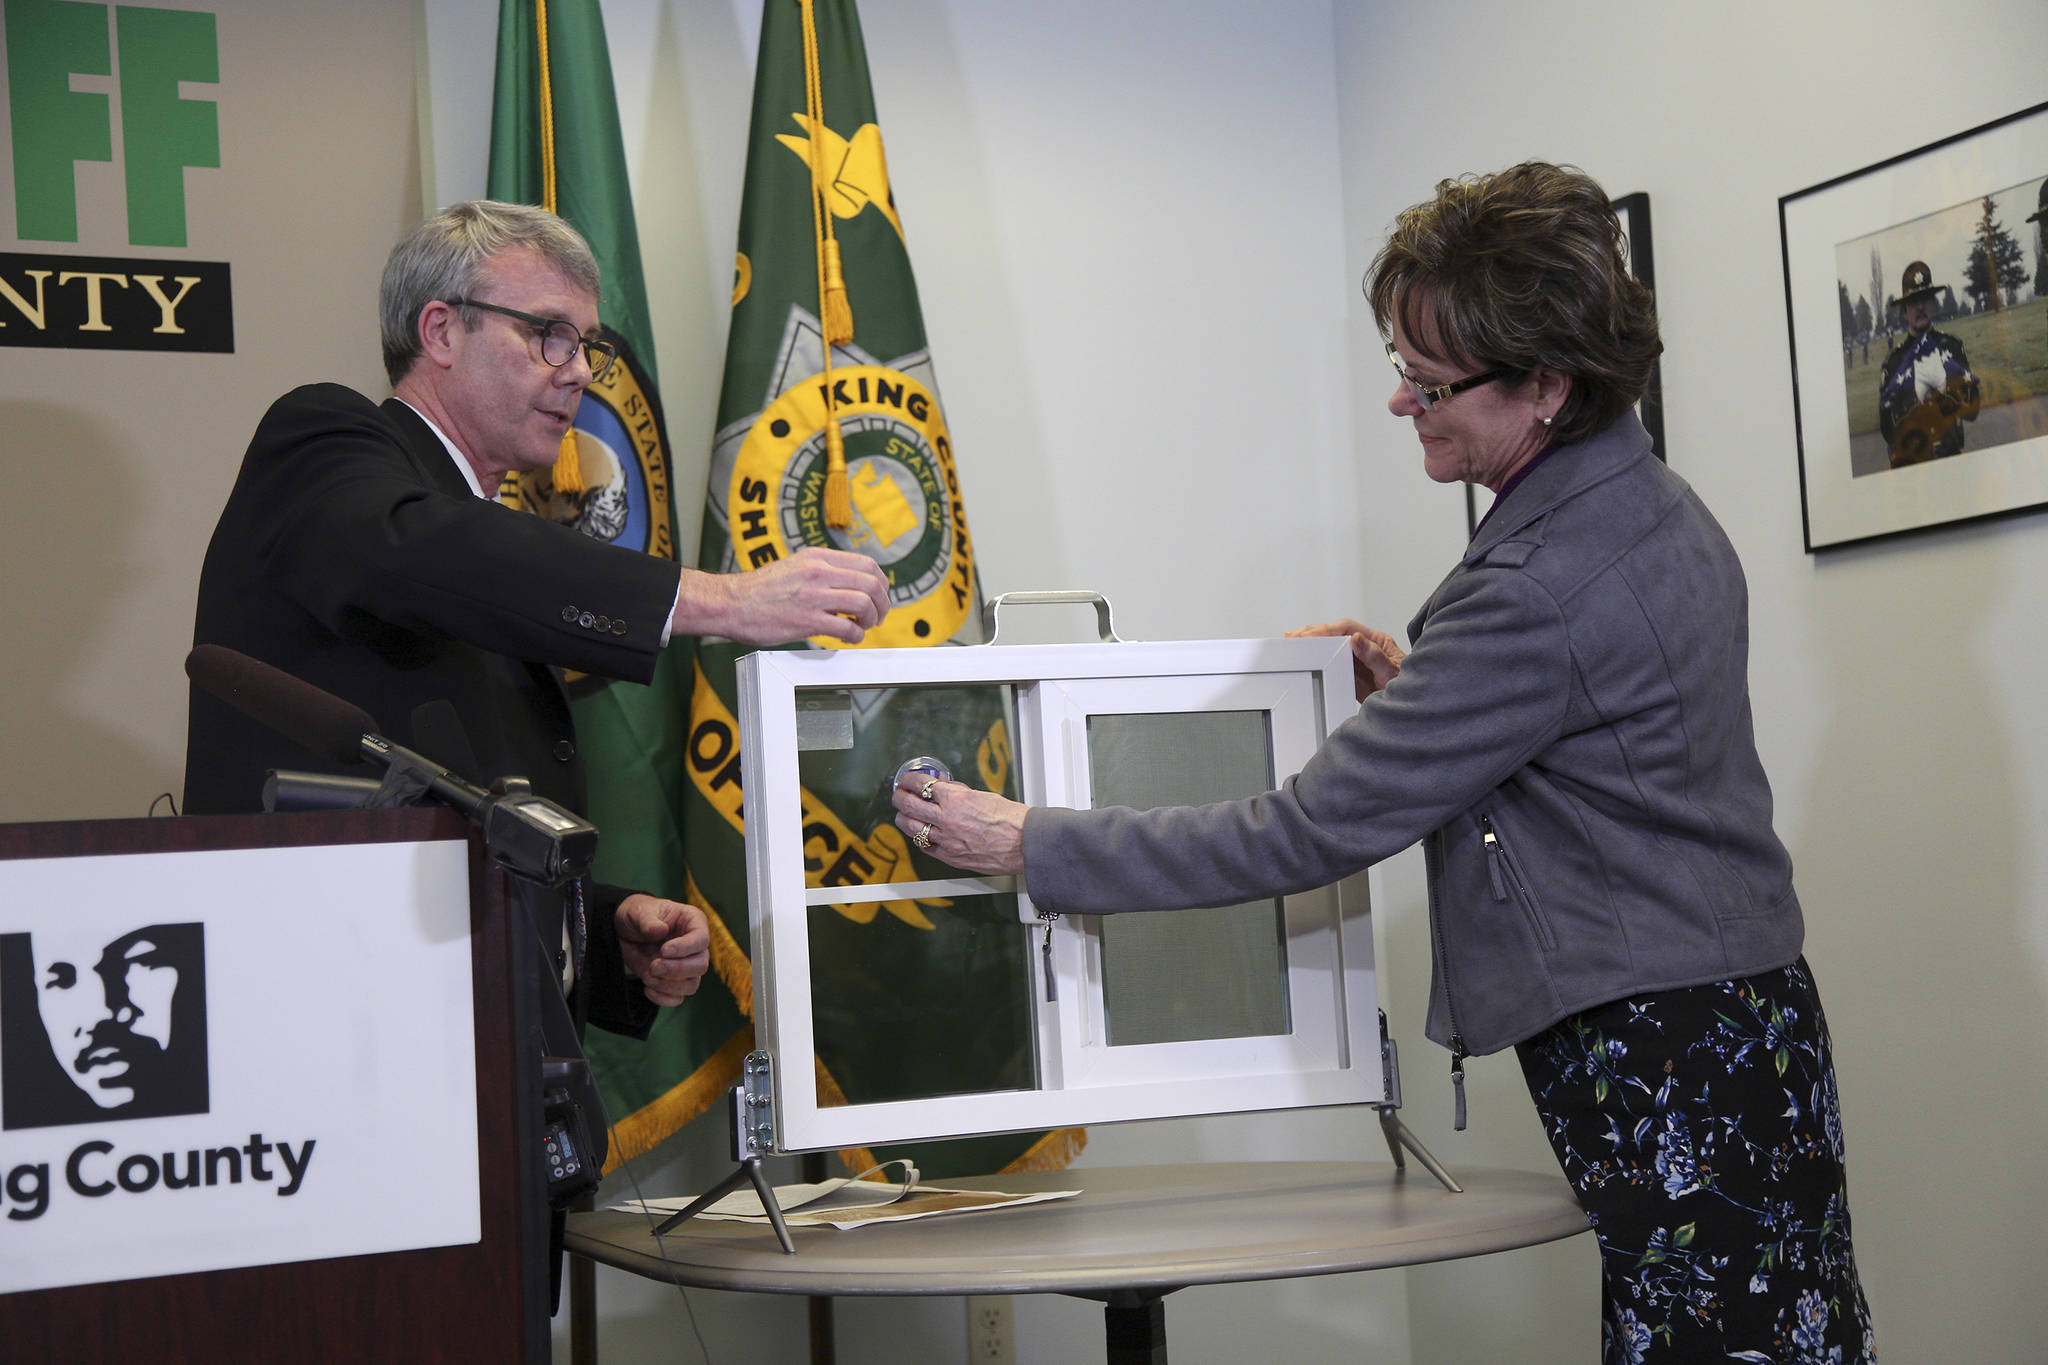 Dr. Brian Johnston, Chief of Pediatrics at Harborview Medical Center, and Councilmember Kathy Lamber give a demonstration with a window safety device. Ashley Hiruko/staff photo